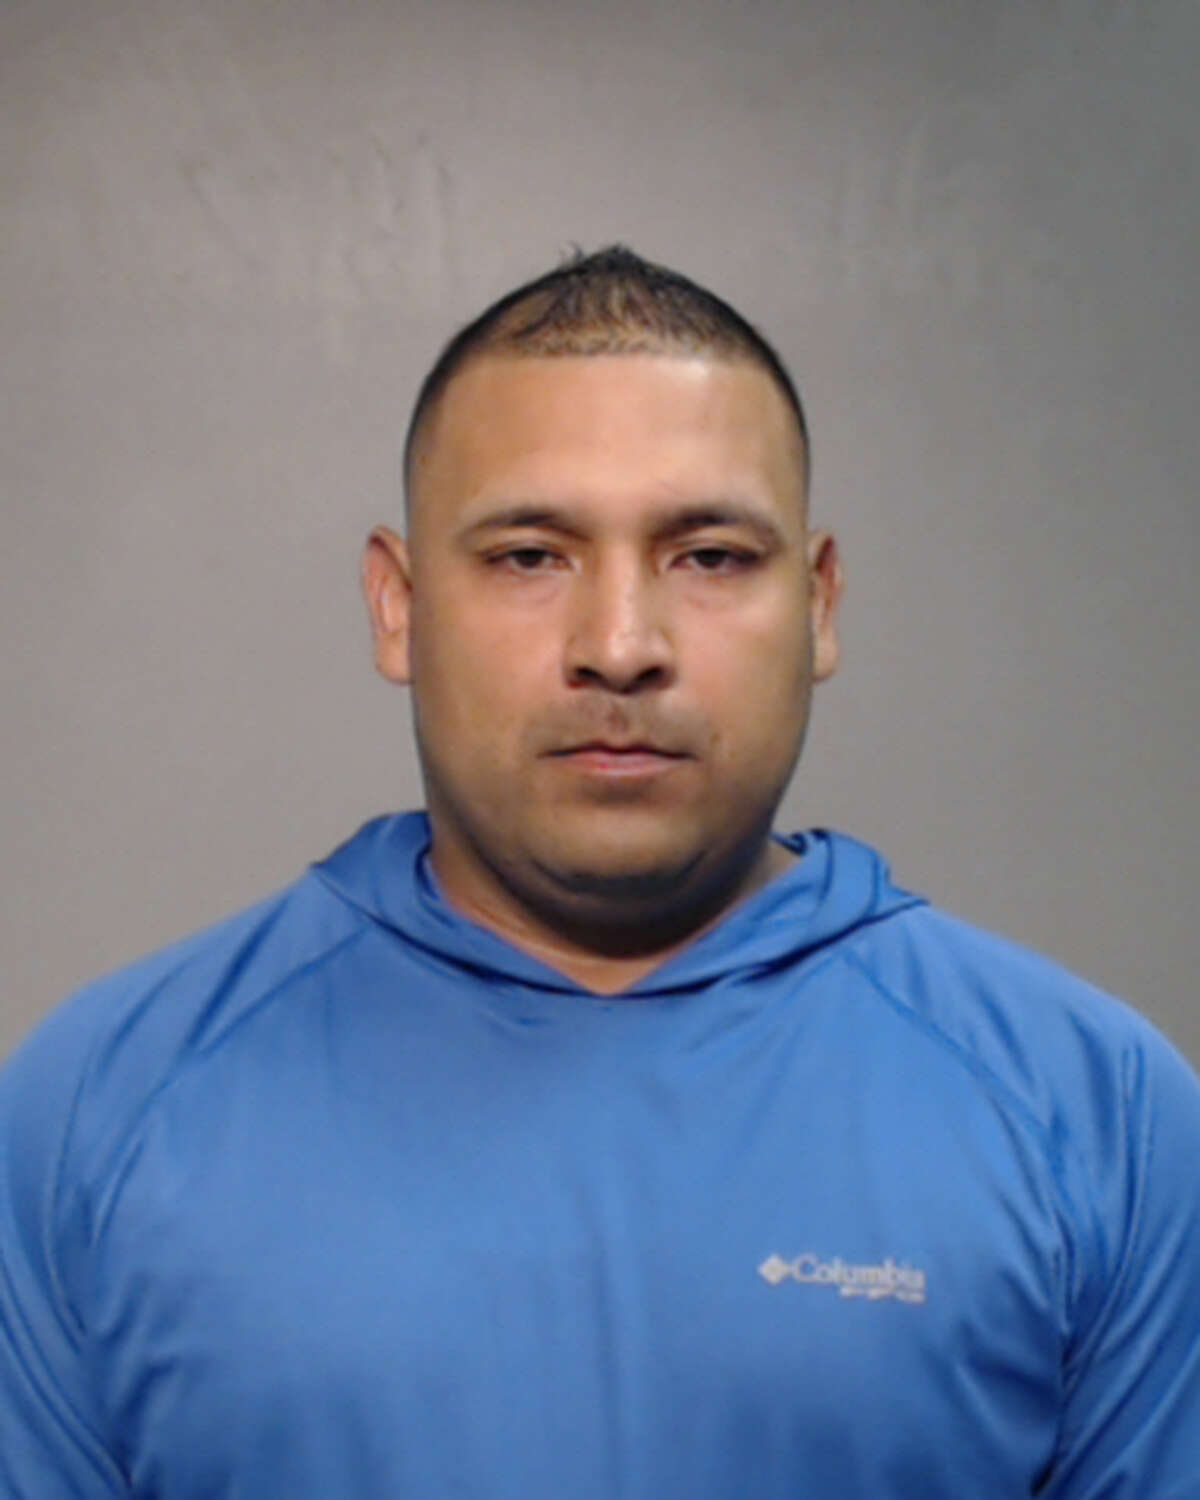 Michael Soto, 33, was arrested Sept. 27, 2016 on one count of official oppression and one count of makign a false report to police. He was released the same day after paying $15,000 in bonds.